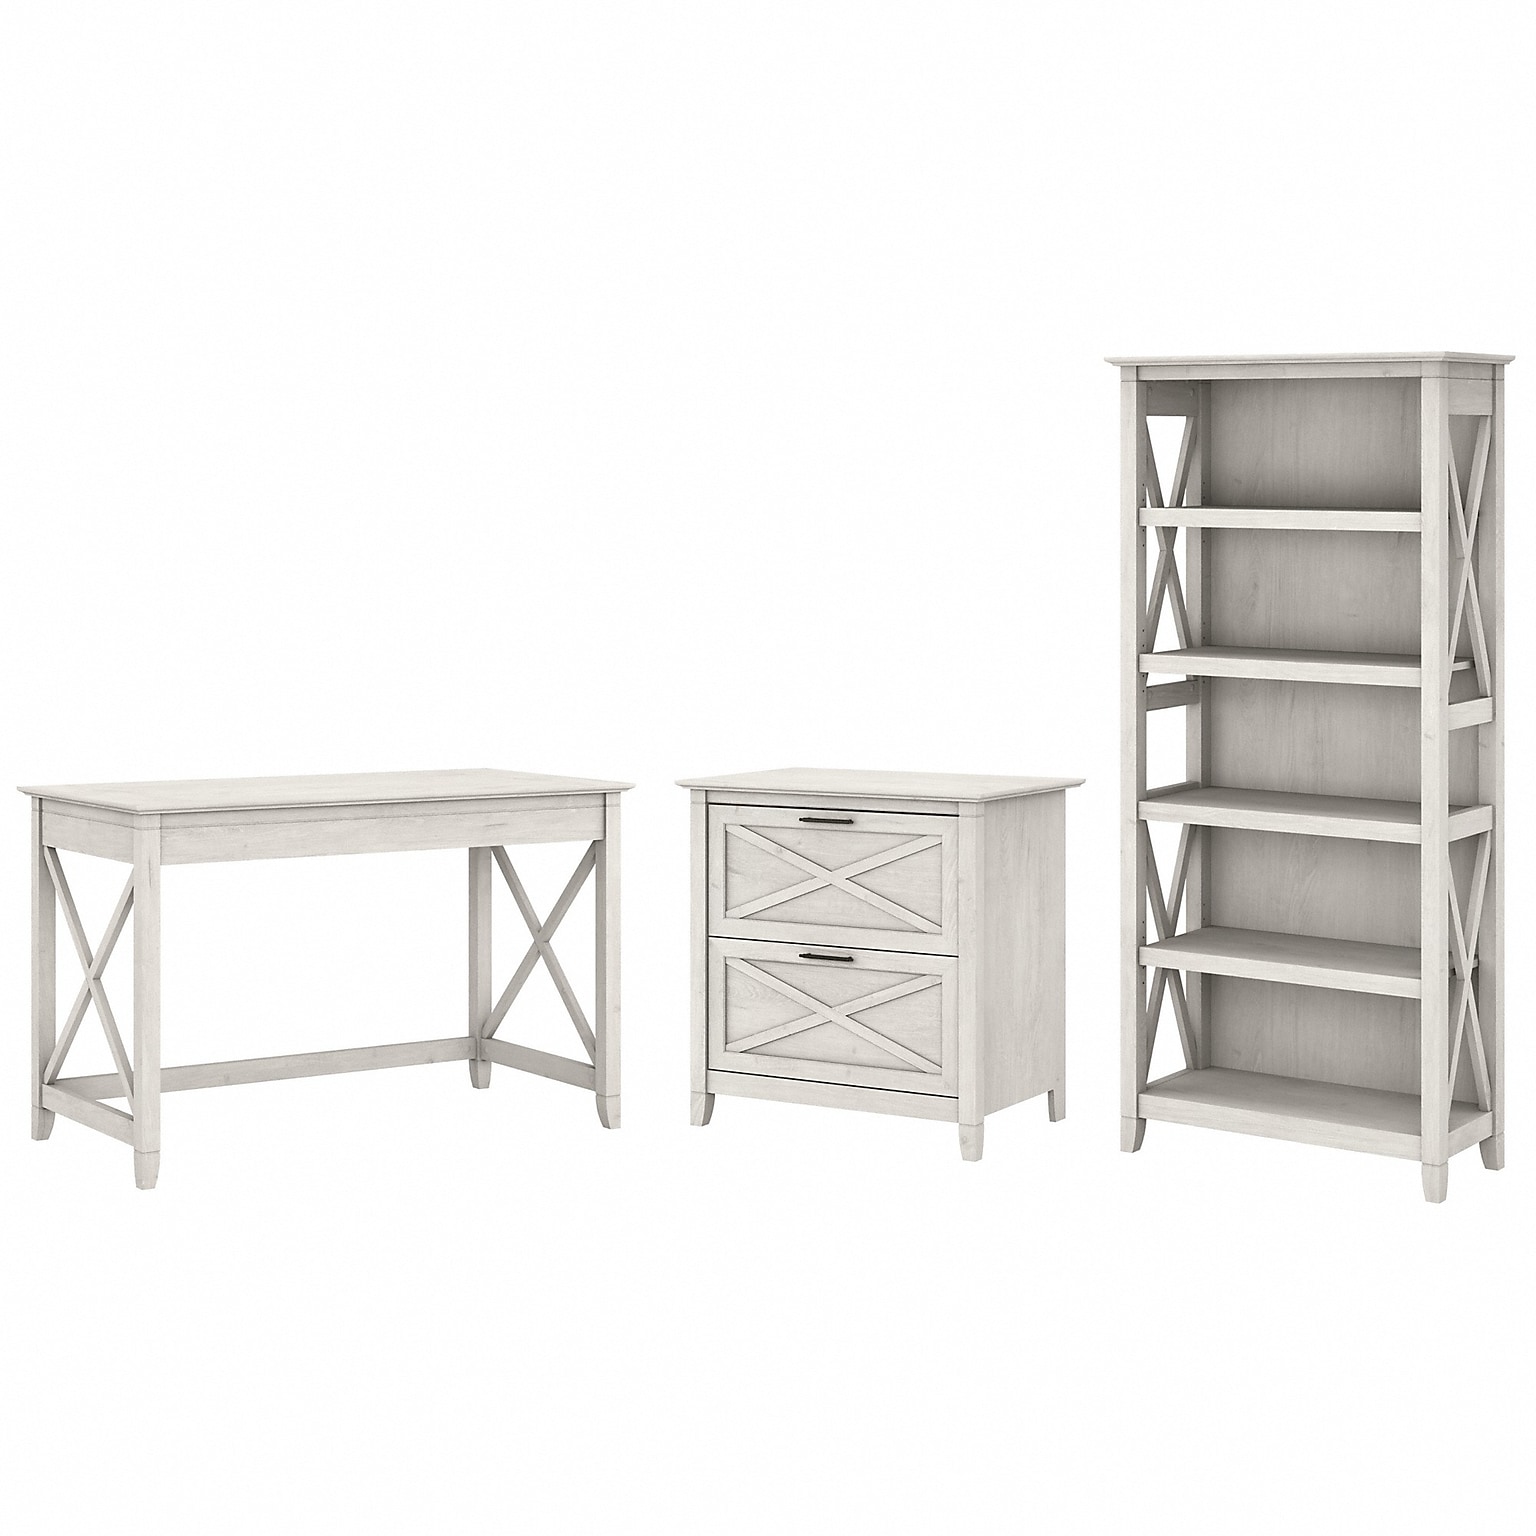 Bush Furniture Key West 48W Writing Desk with 2 Drawer Lateral File Cabinet and 5 Shelf Bookcase, Linen White Oak (KWS004LW)